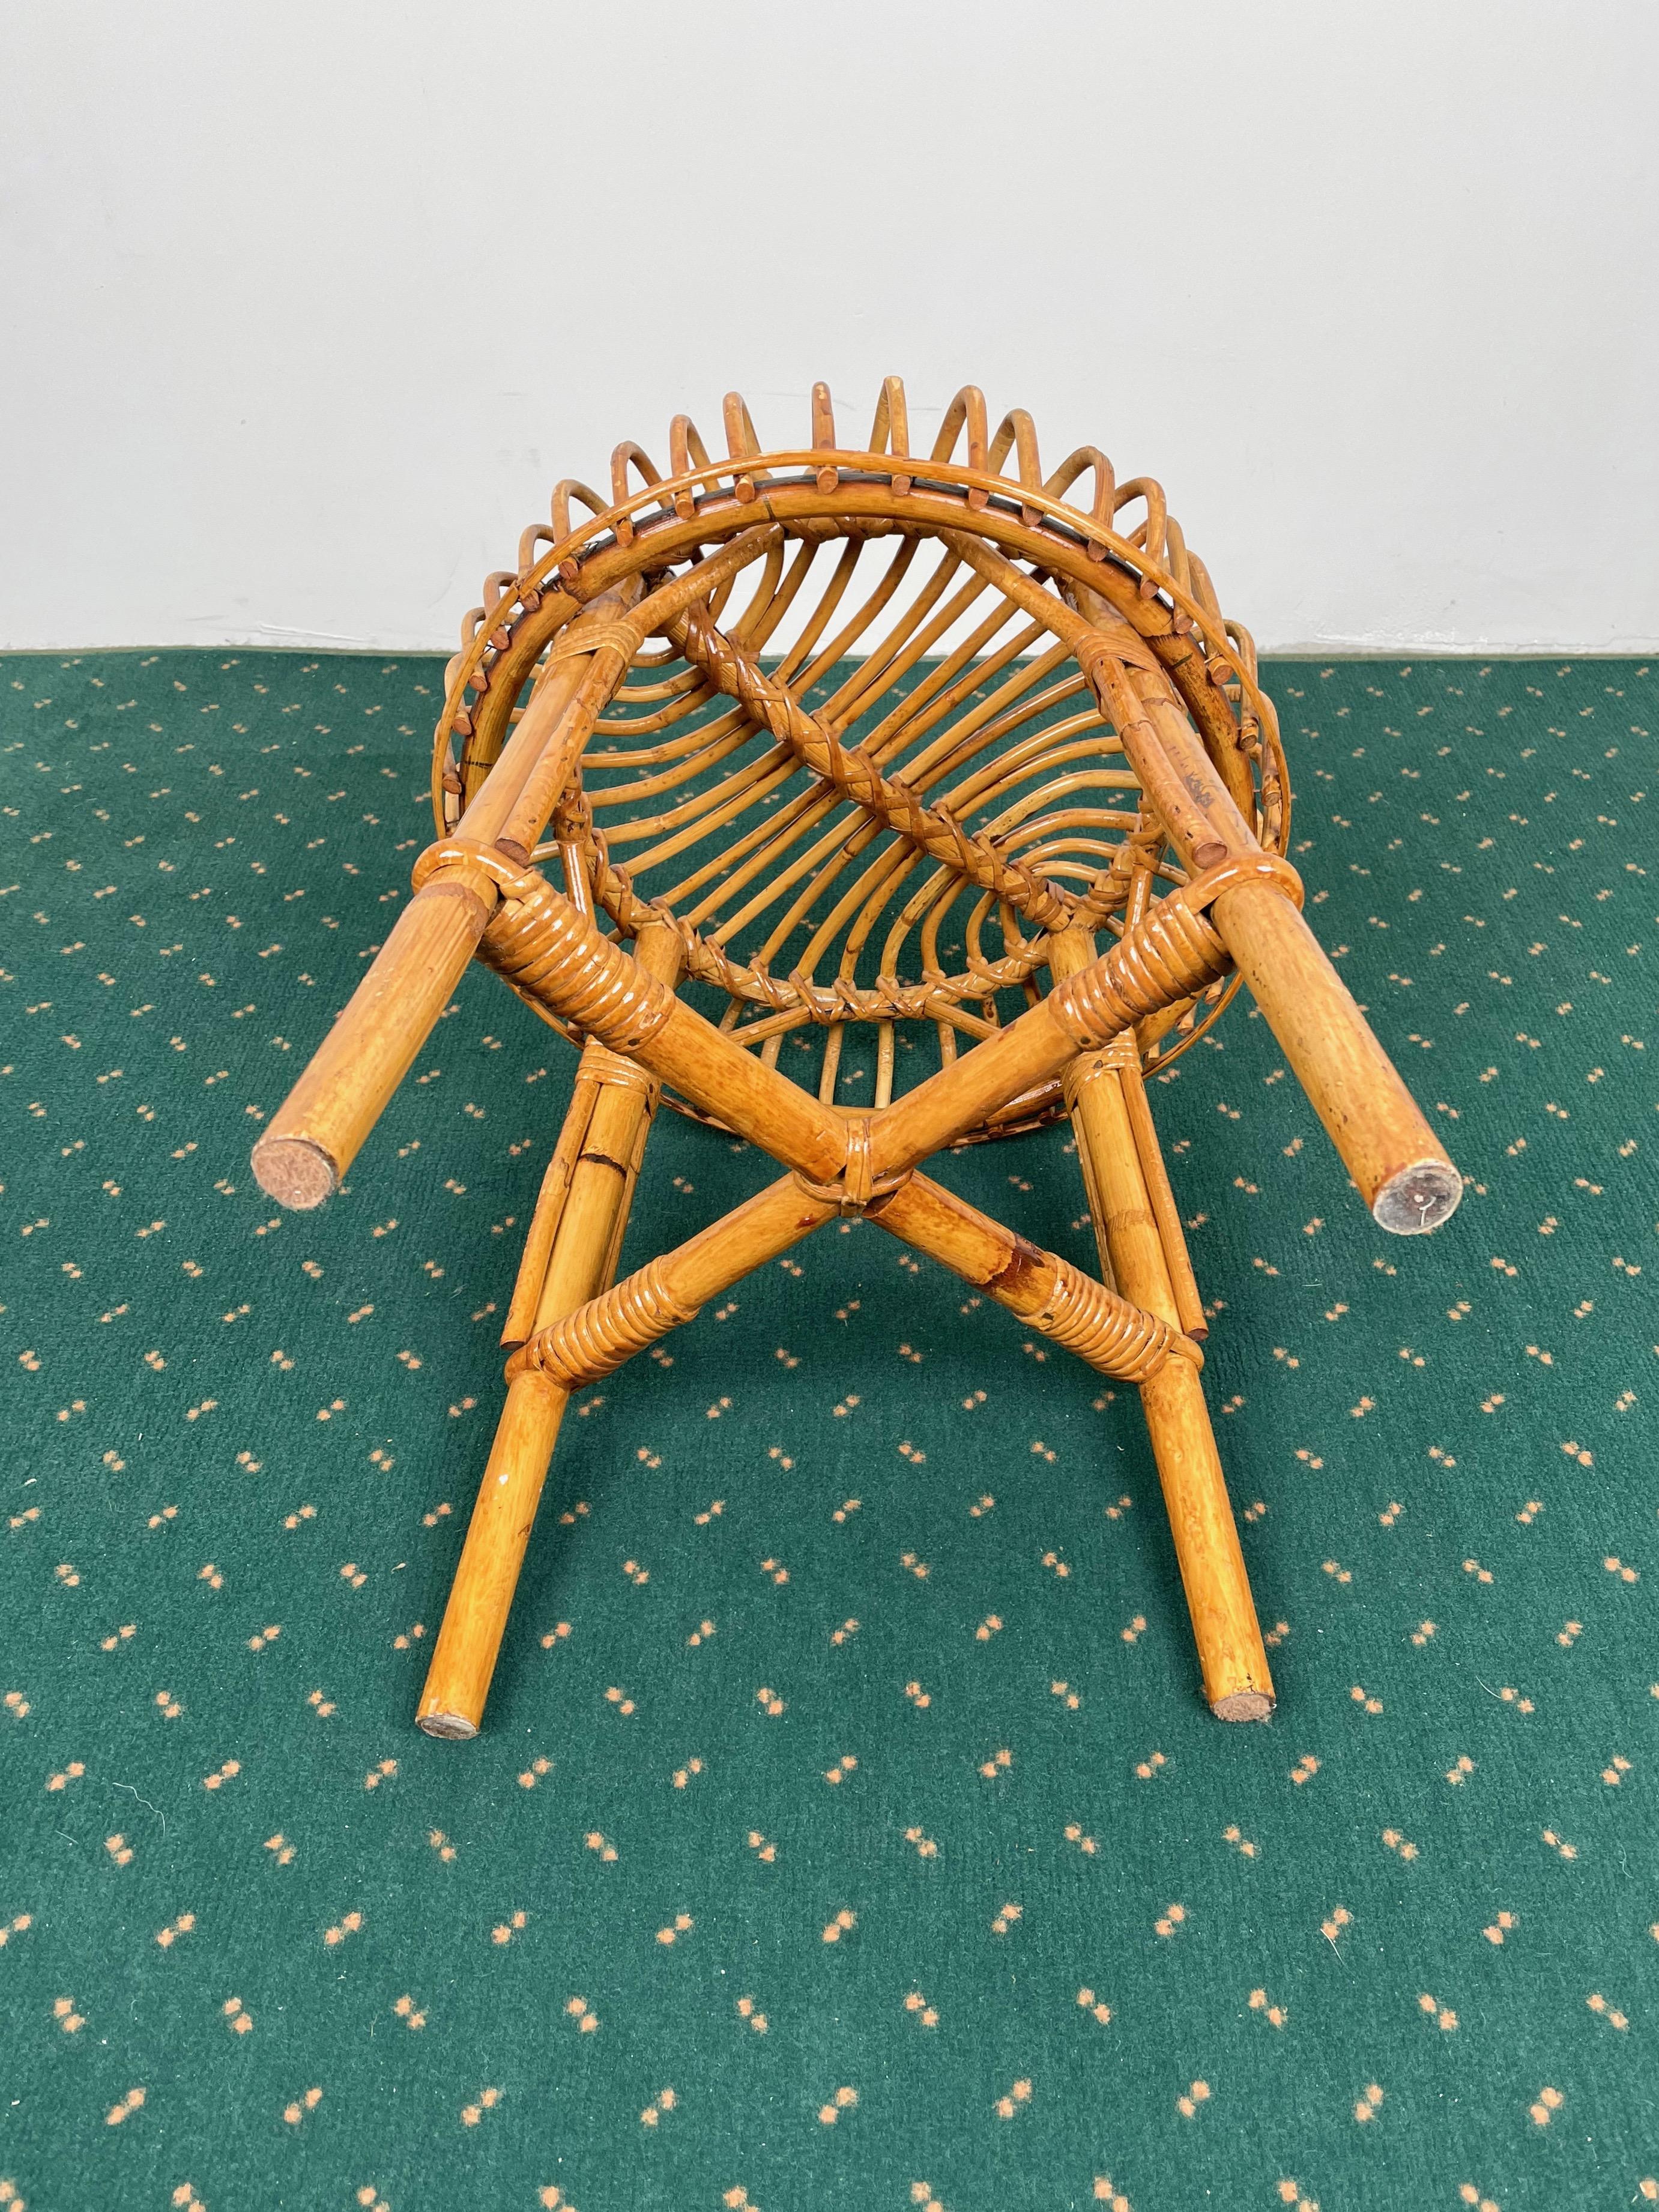 Mid-Century Modern Bamboo Rattan Stool, Italy, 1960s For Sale 3